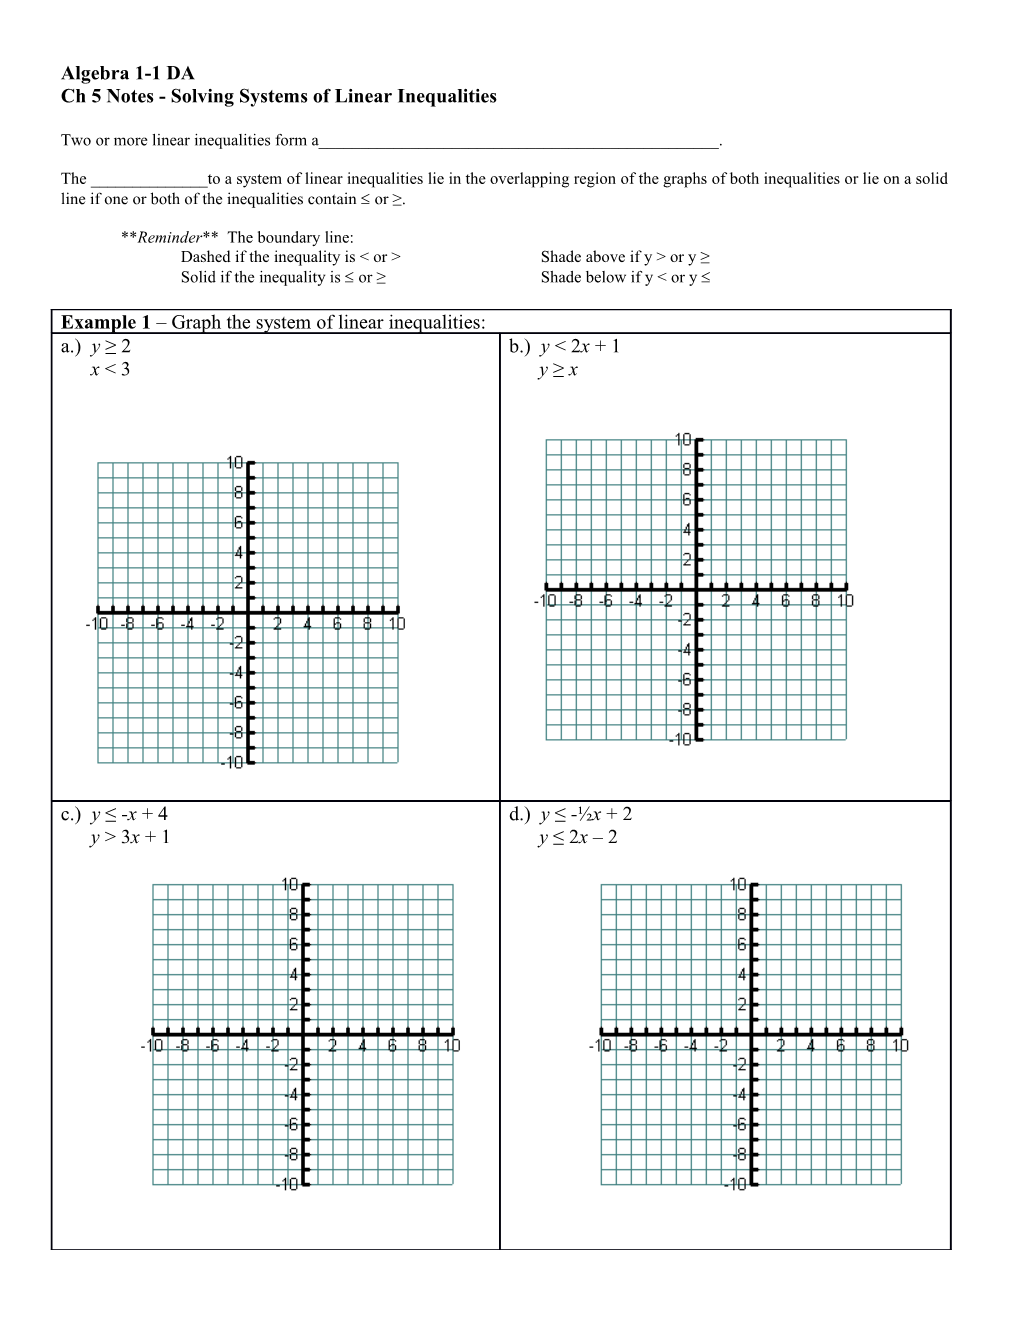 Ch 5 Notes - Solving Systems of Linear Inequalities